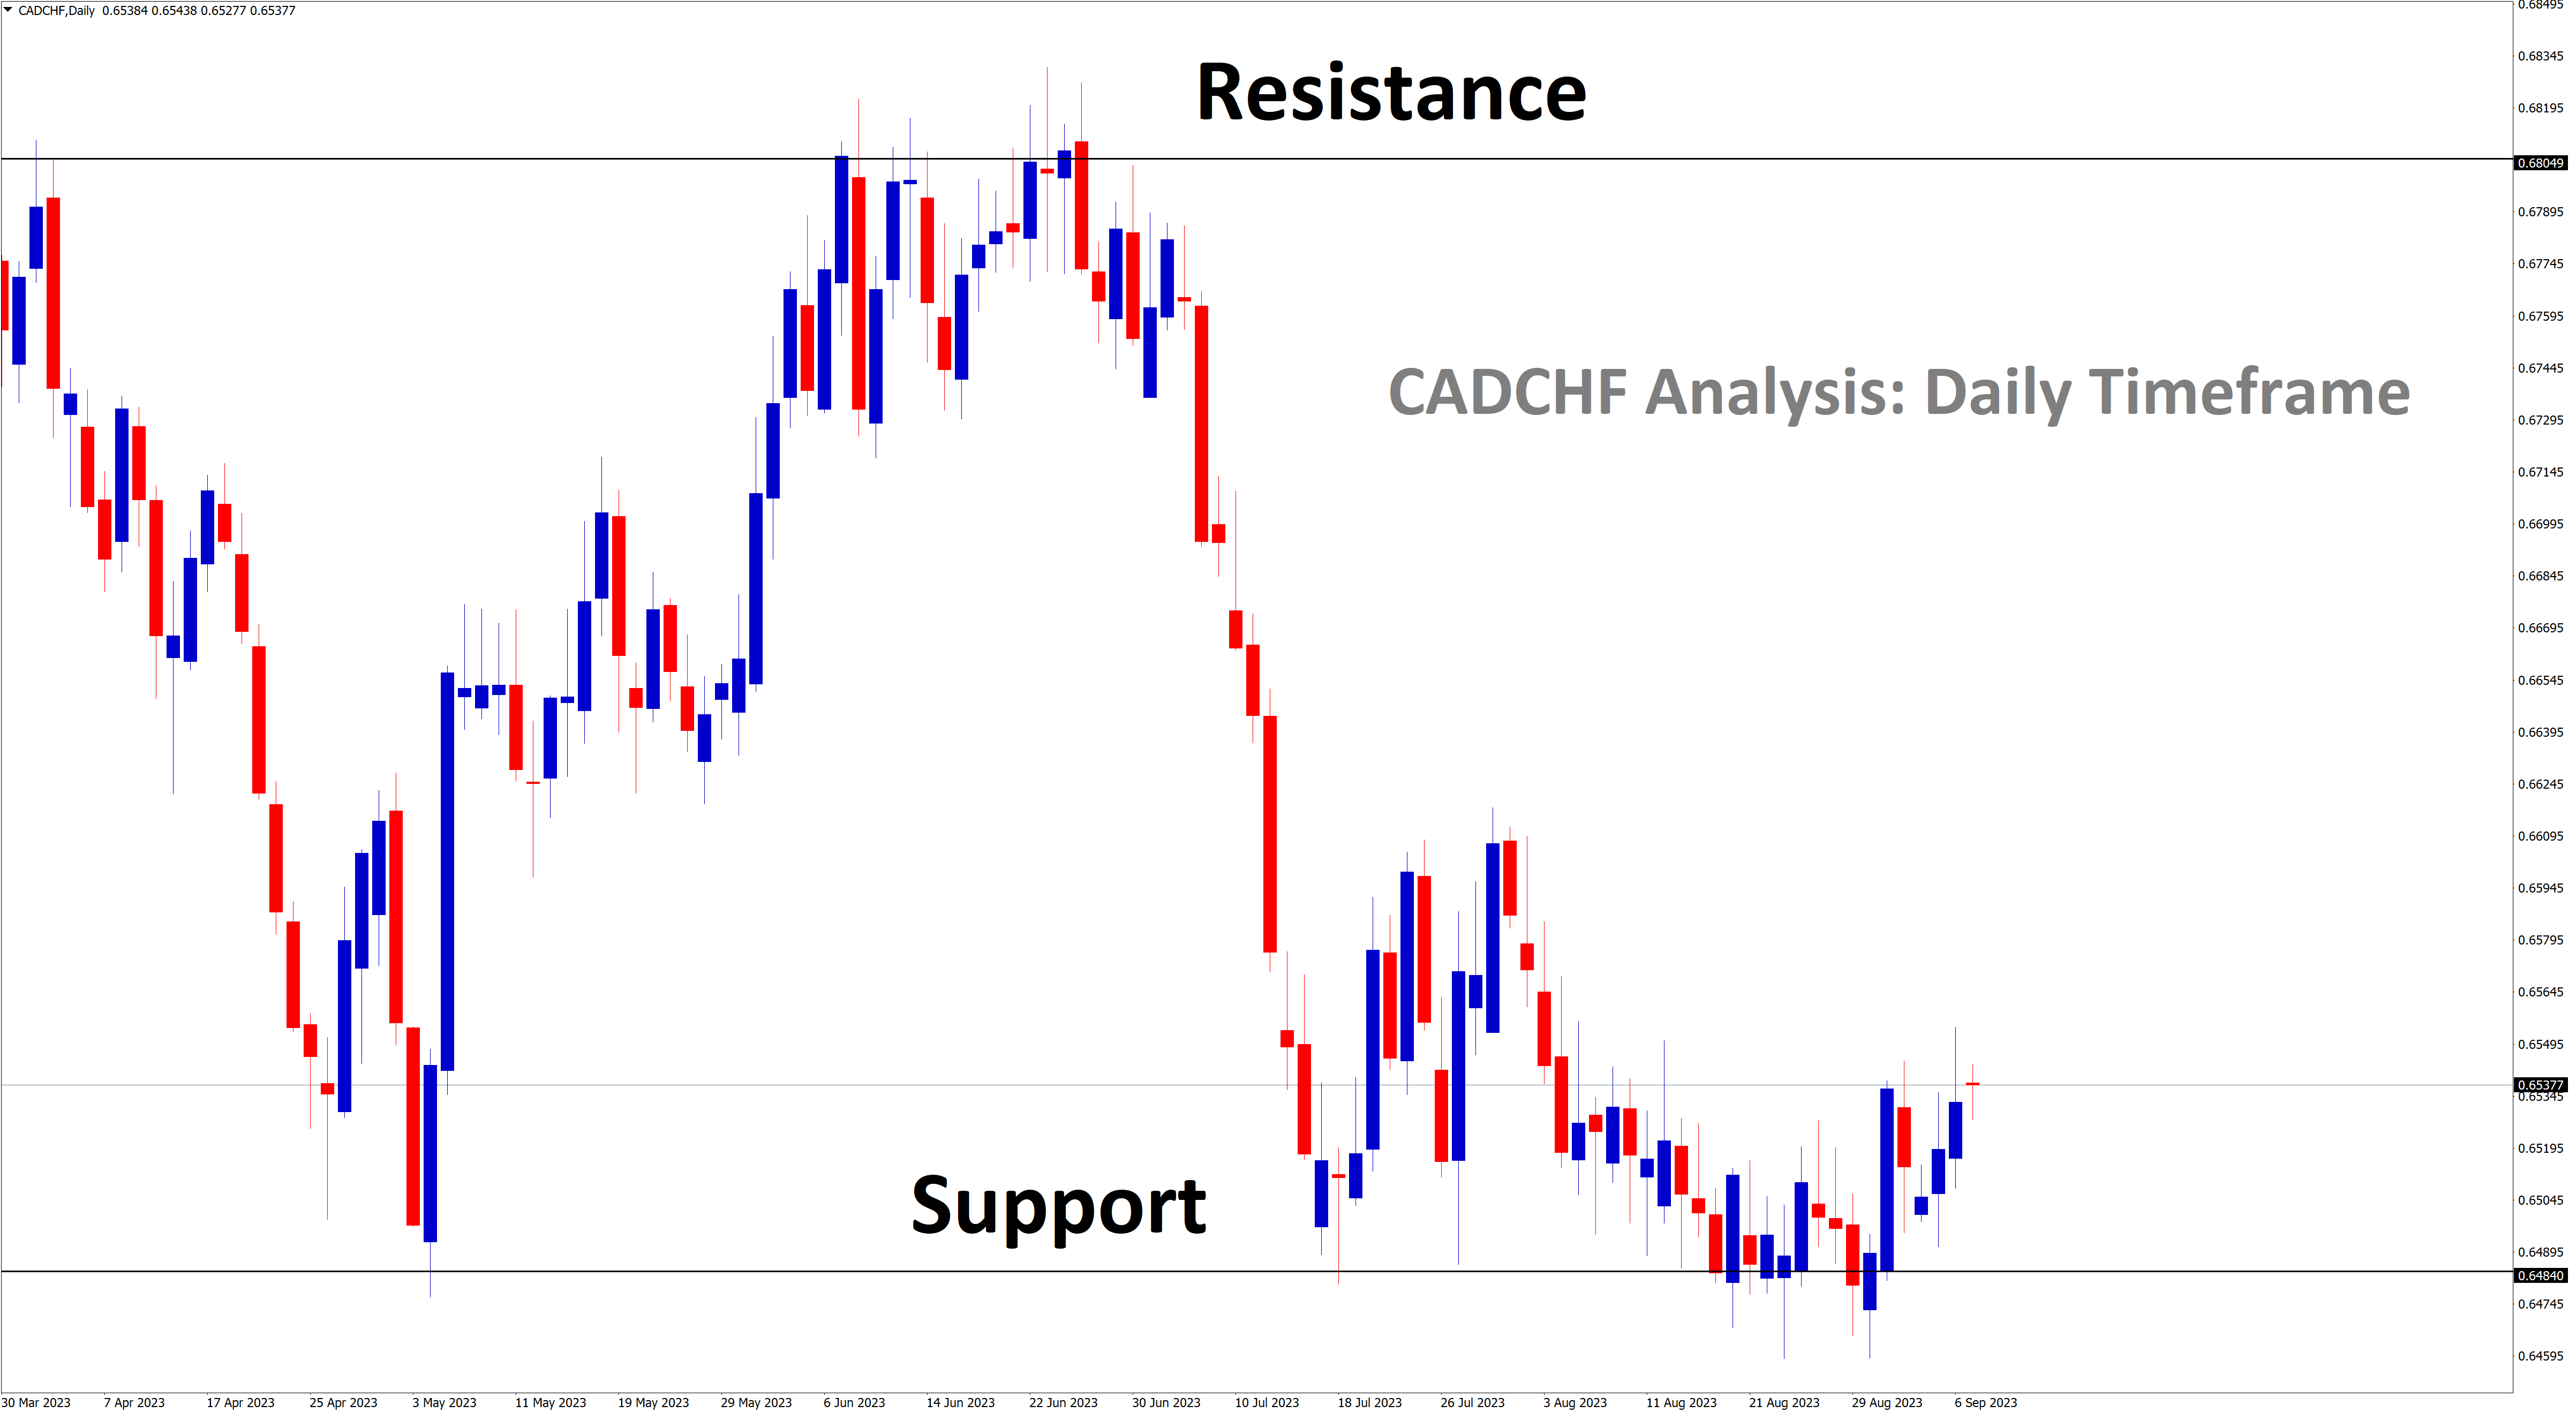 CADCHF is rebounding from the support